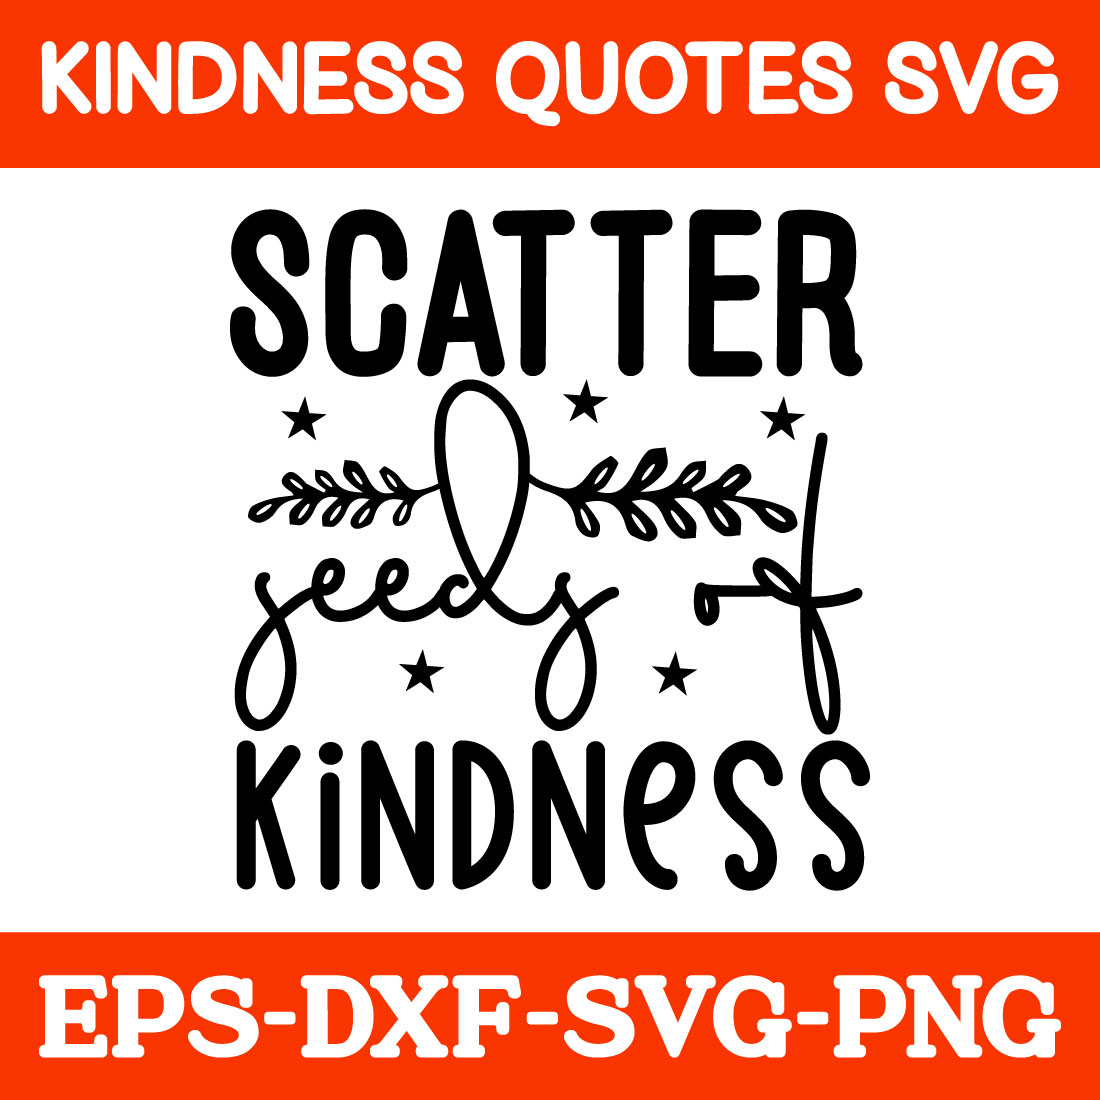 Kindness Quotes Svg preview image.